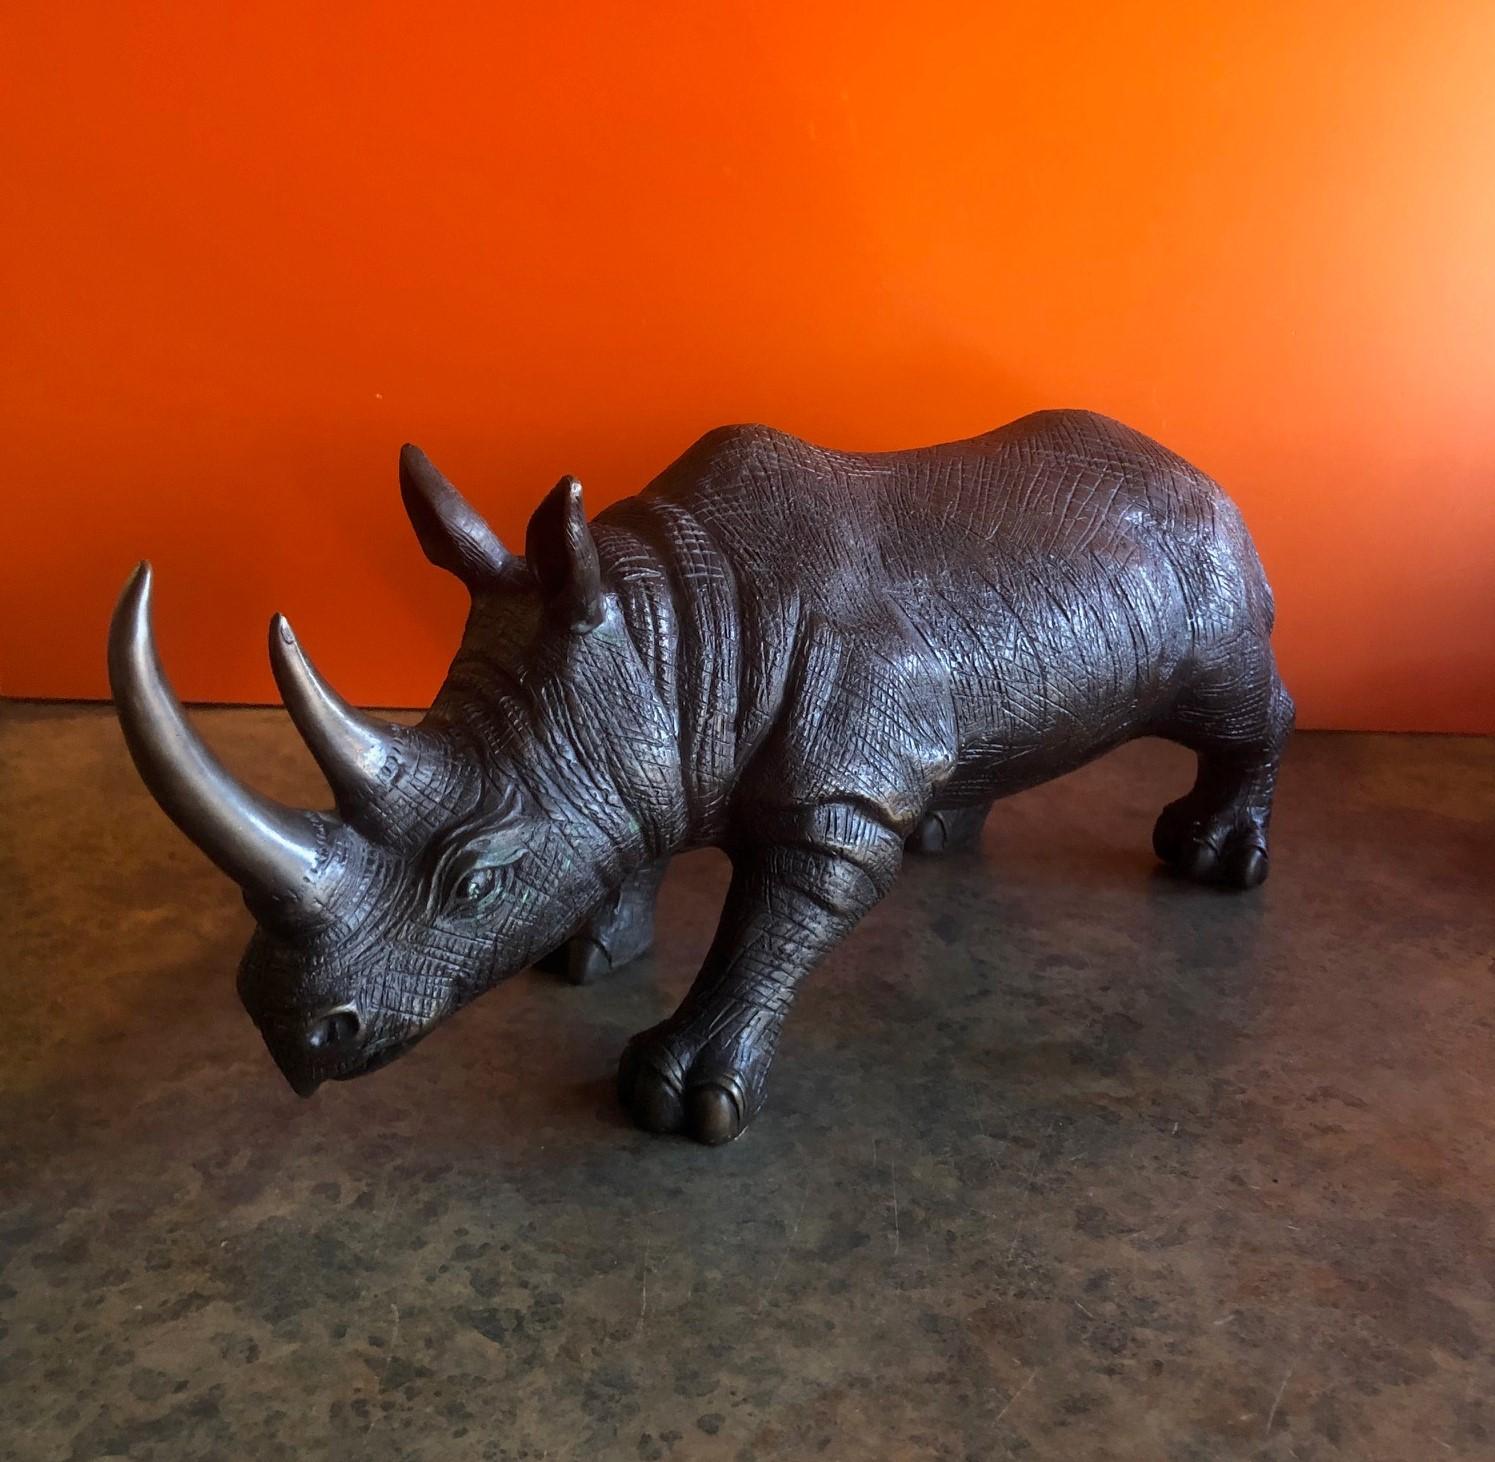 Large bronze rhinoceros / rhino sculpture, circa 1990s. The piece has great detail and patina and measures 20